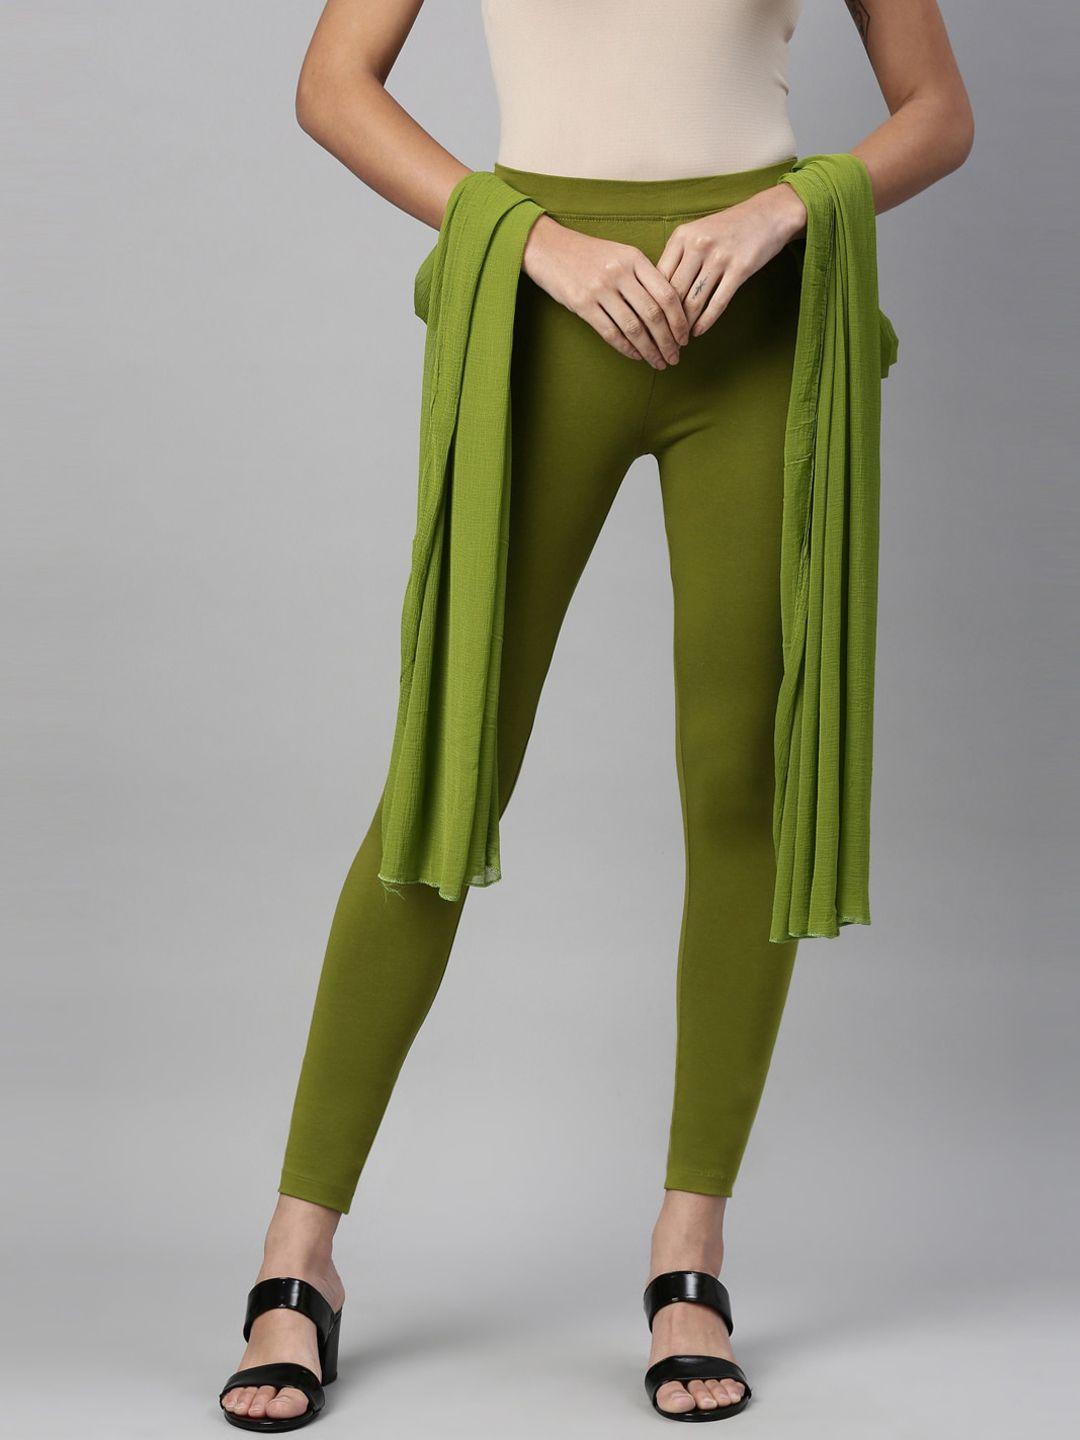 twin-birds-women-olive-green-solid-ankle-length-leggings-&-shawl